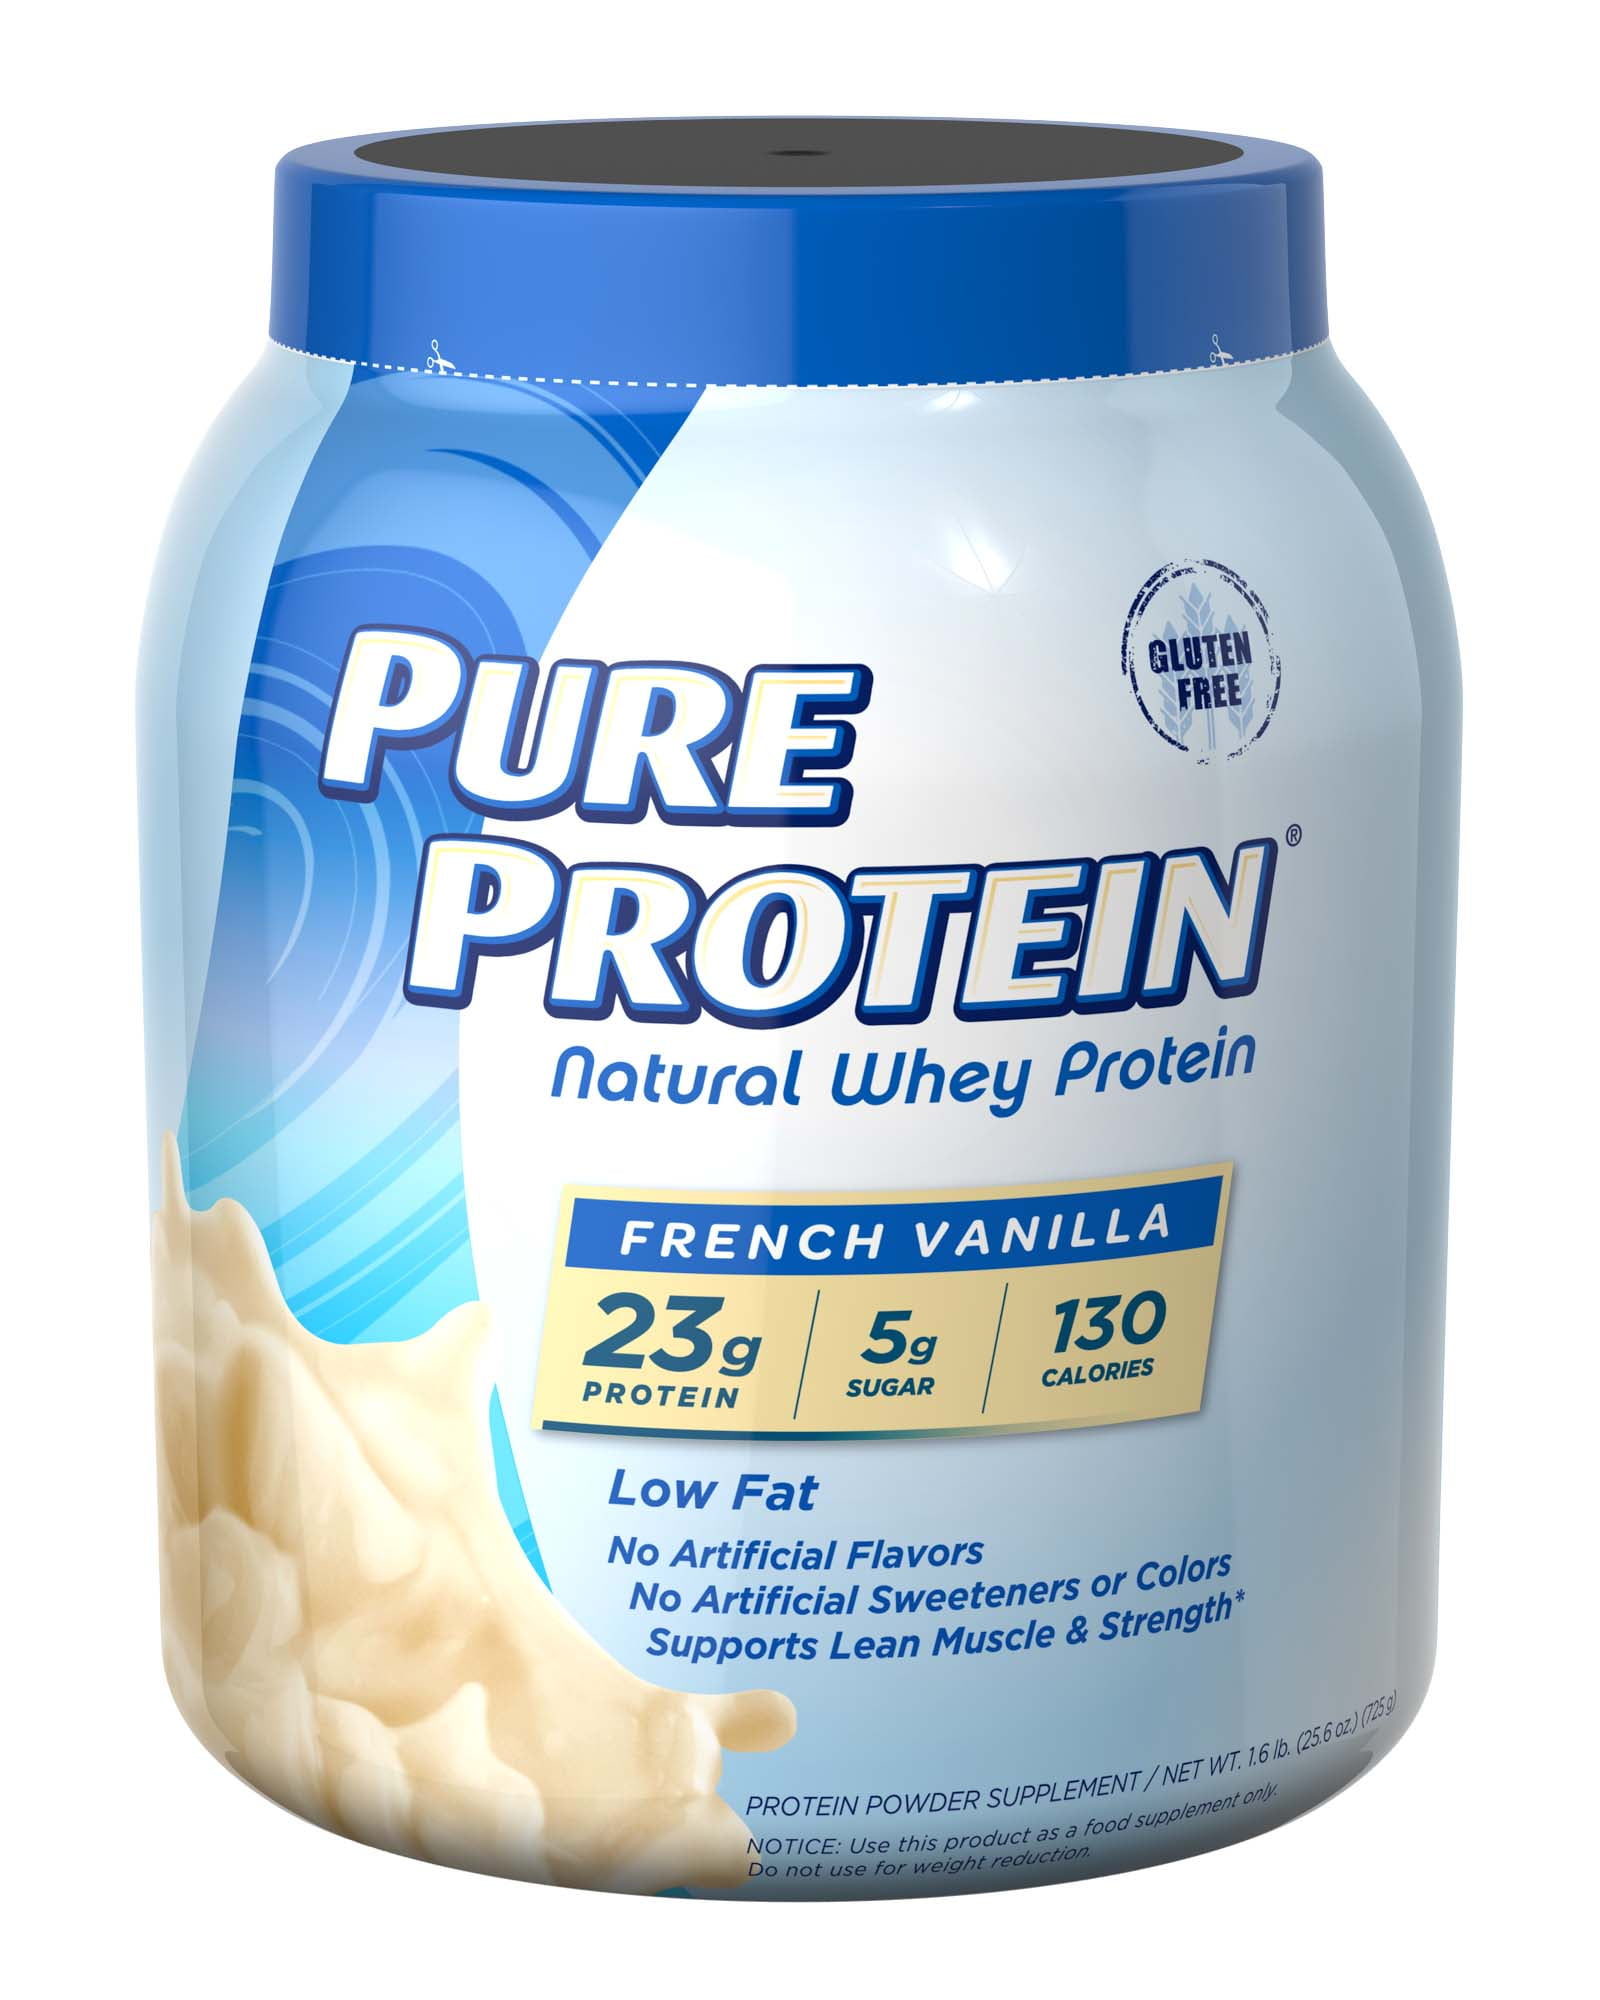 Pure isolate protein powder